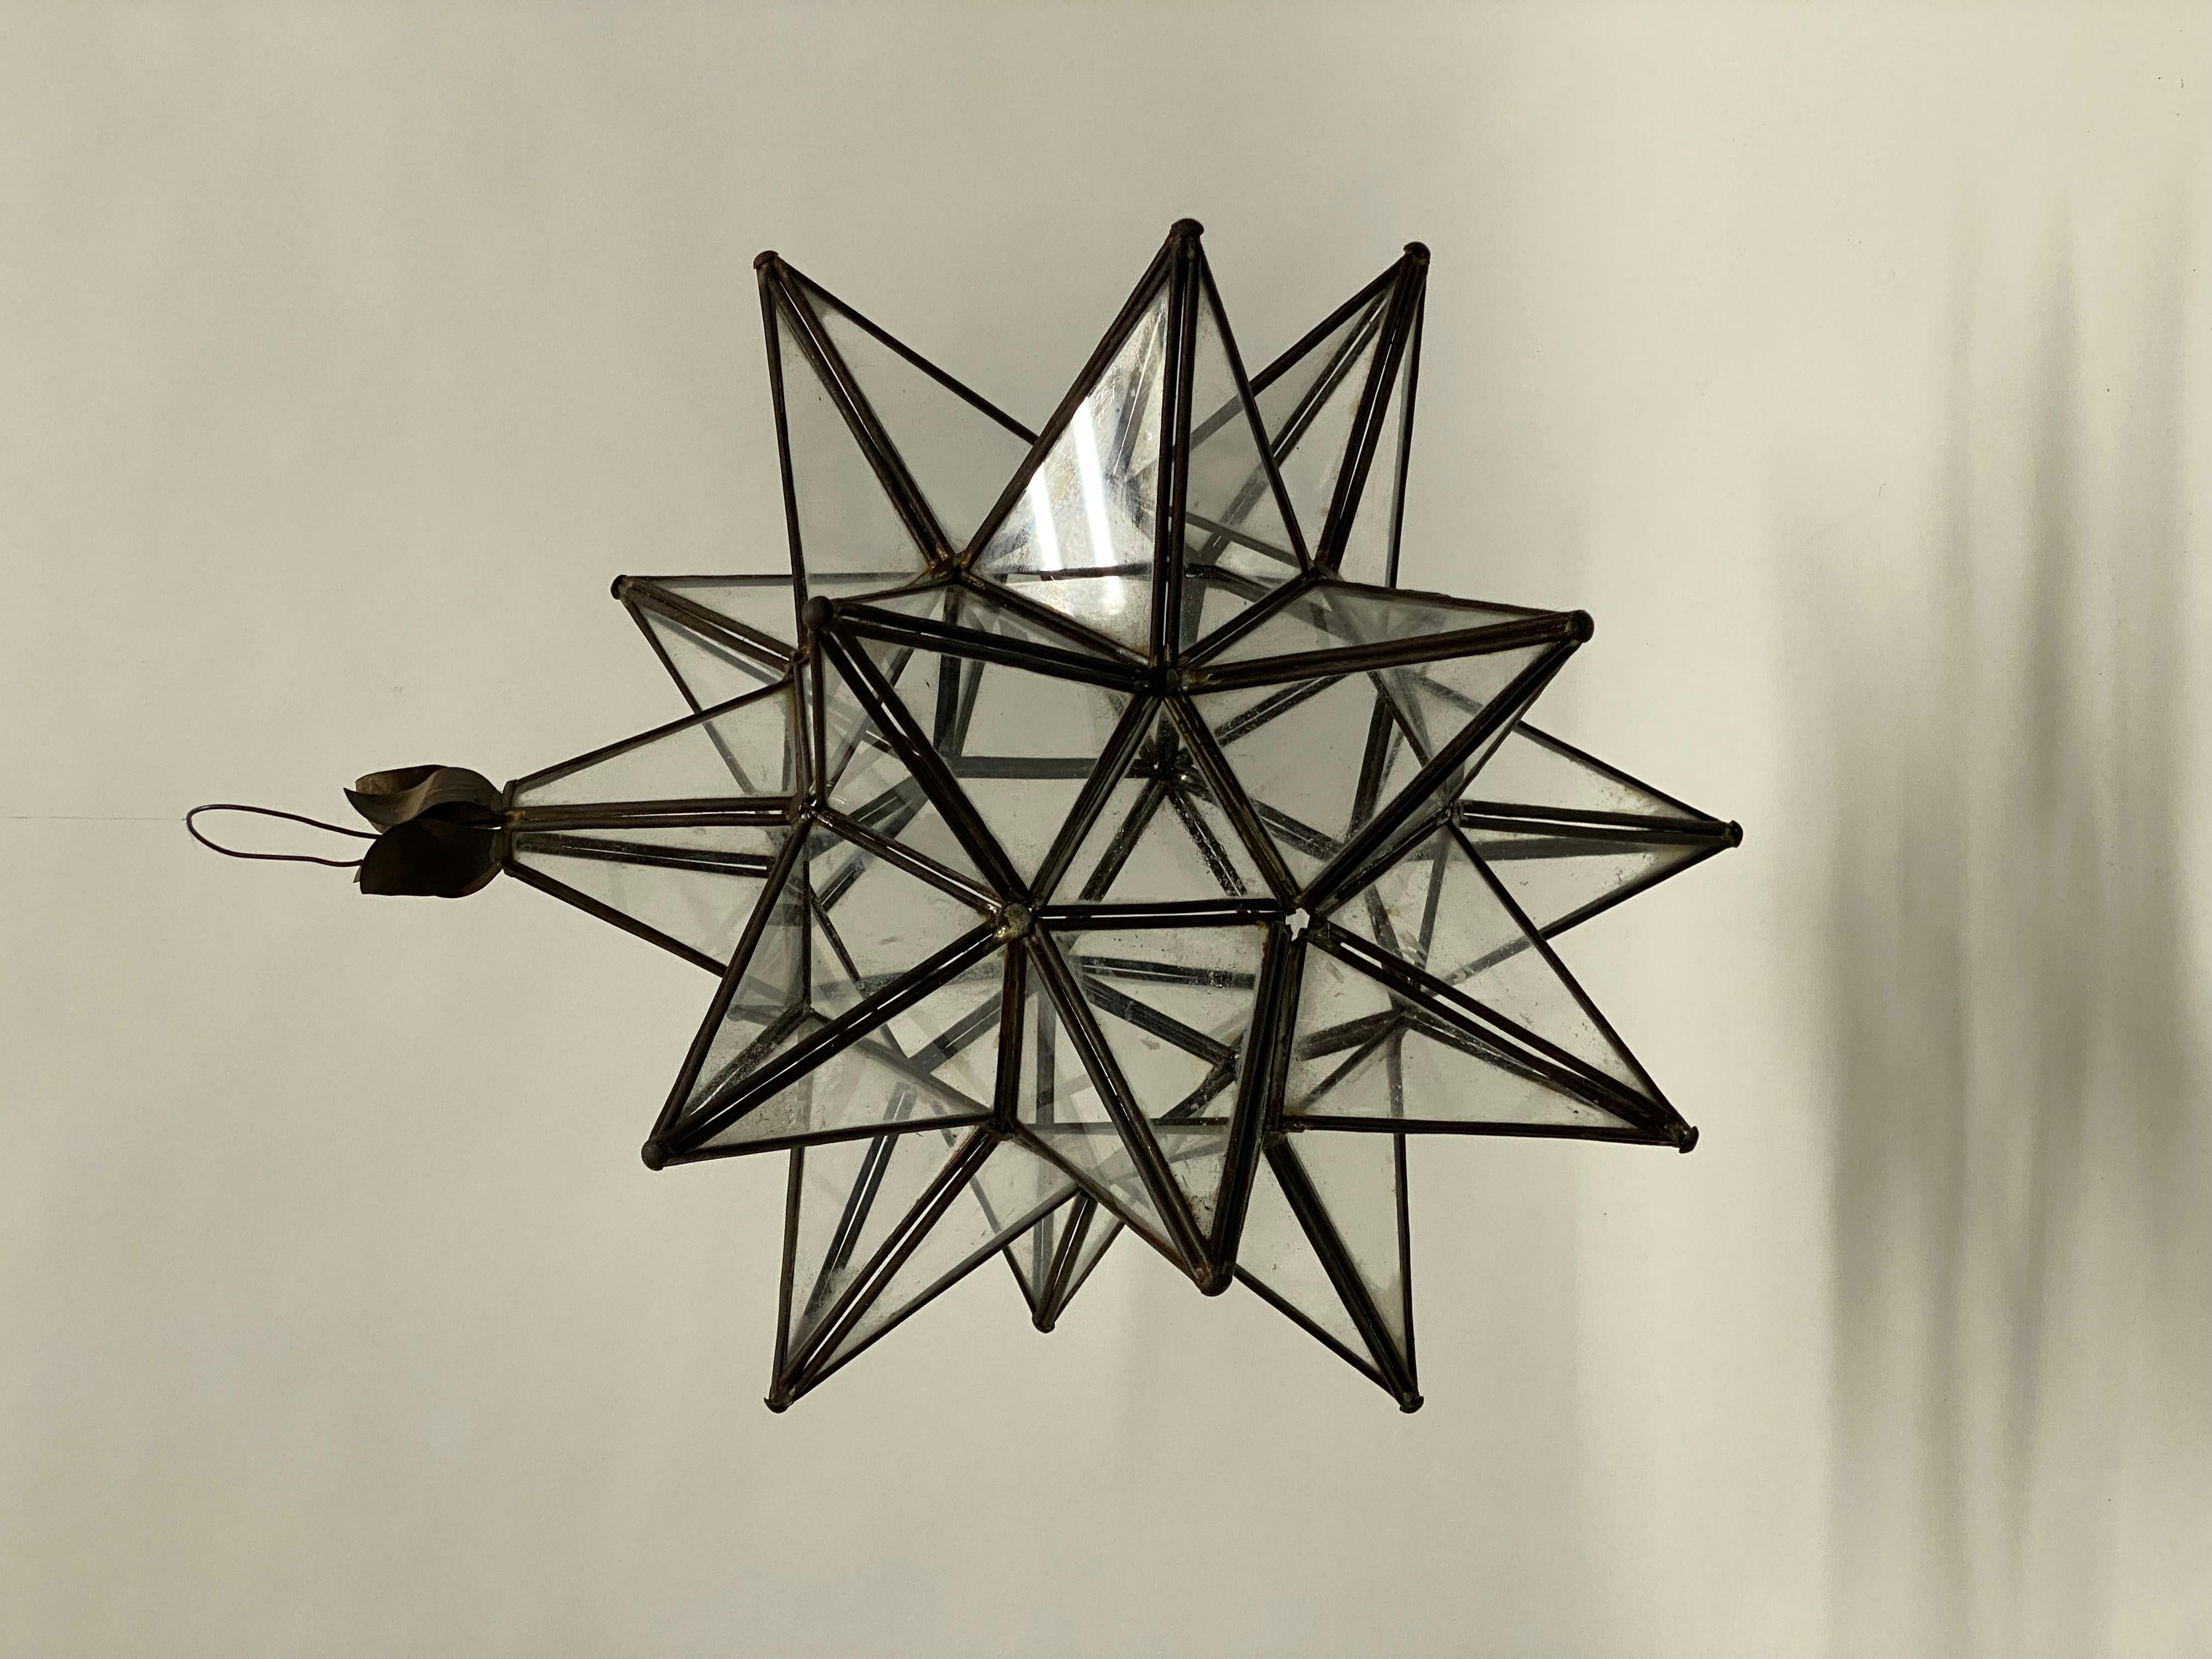 Beautiful leaded glass panel Moravian Star hanging fixture. Circa 1960. Most likely originates from Mexico. The Moravian Star has deep spiritual meaning. Some Moravian Stars have 26 points and some have 20 points, as well as 100 points. There is a